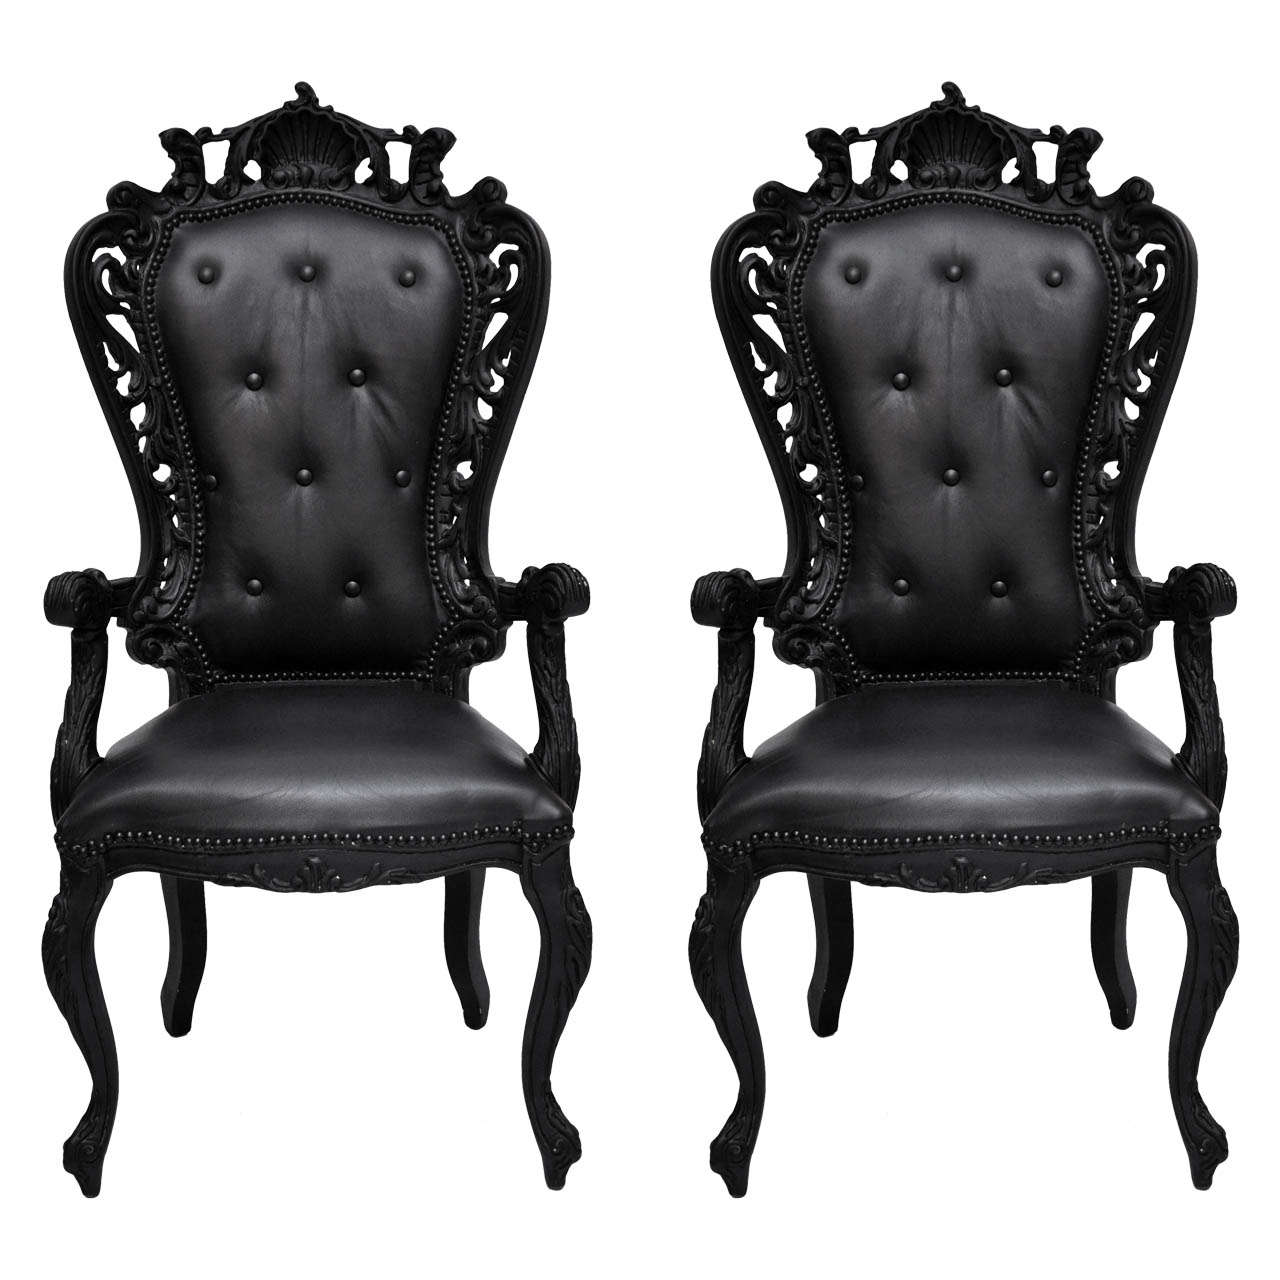 Pair of Belteresque Chairs